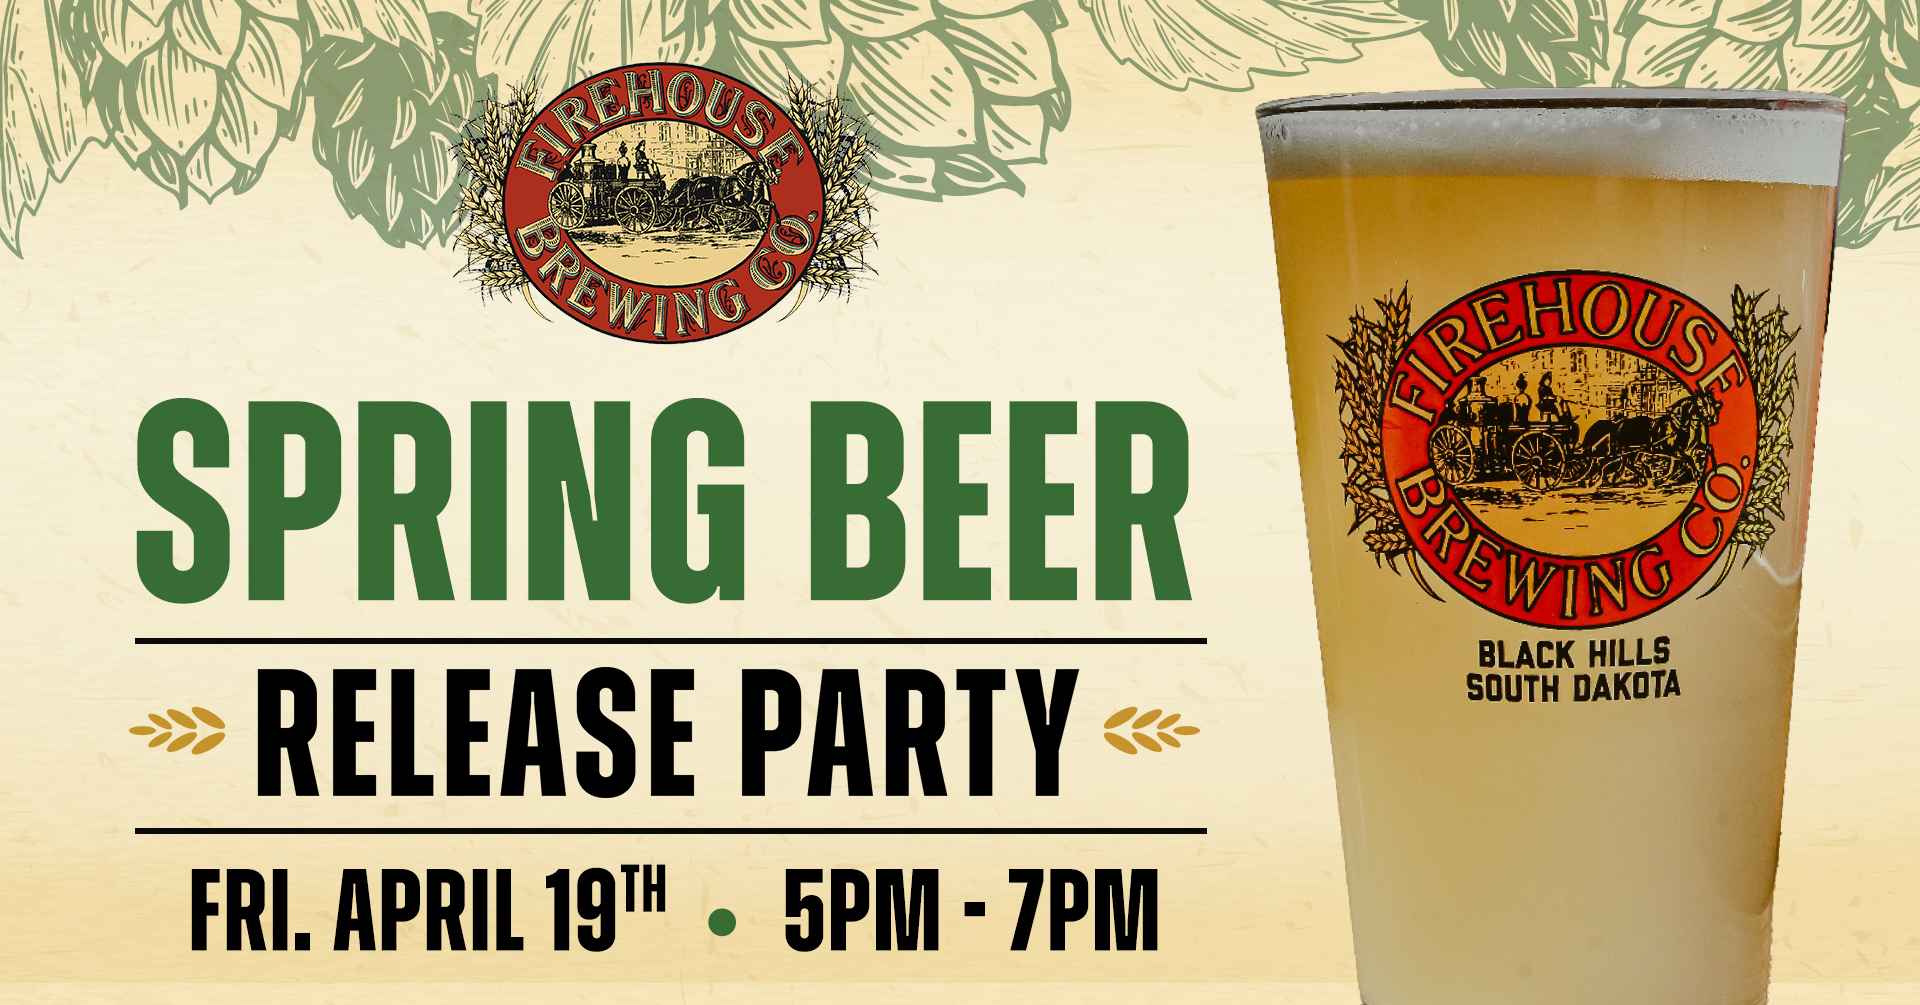 Firehouse Spring Beer Release Party